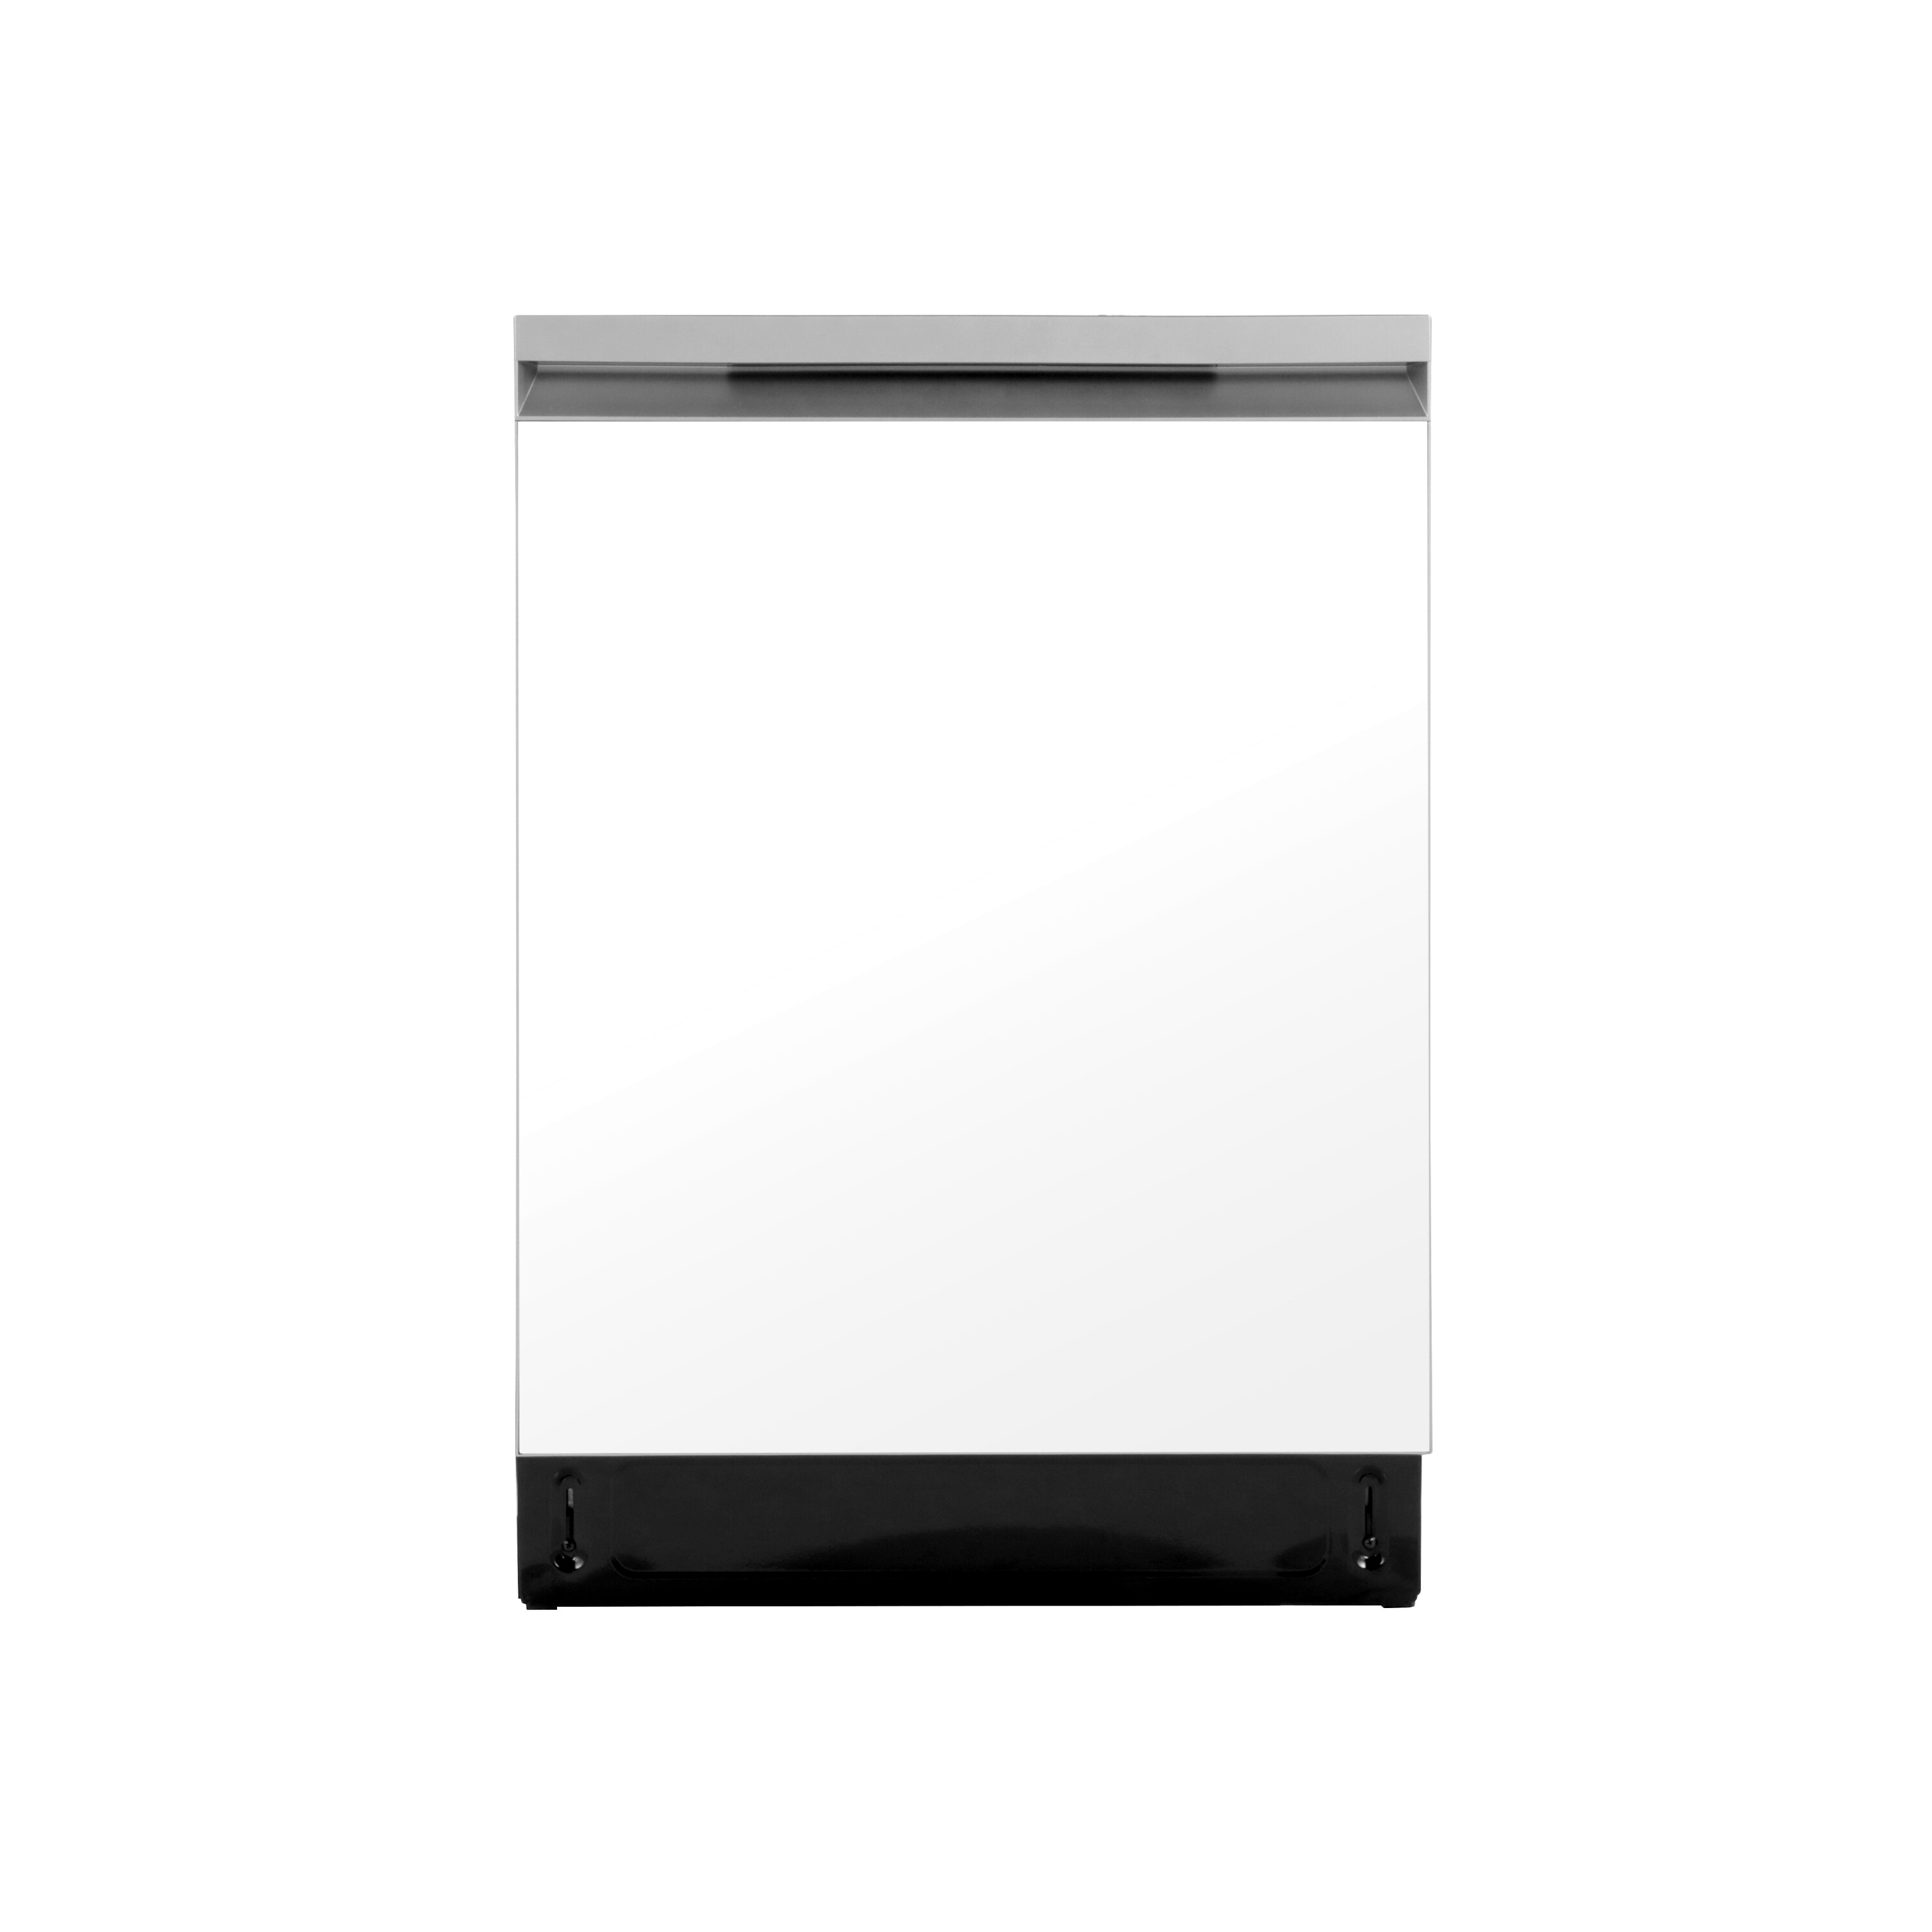 Samsung Smart 42dBA Dishwasher with StormWash+ and Smart Dry Black  Stainless Steel DW80B7070UG - Best Buy